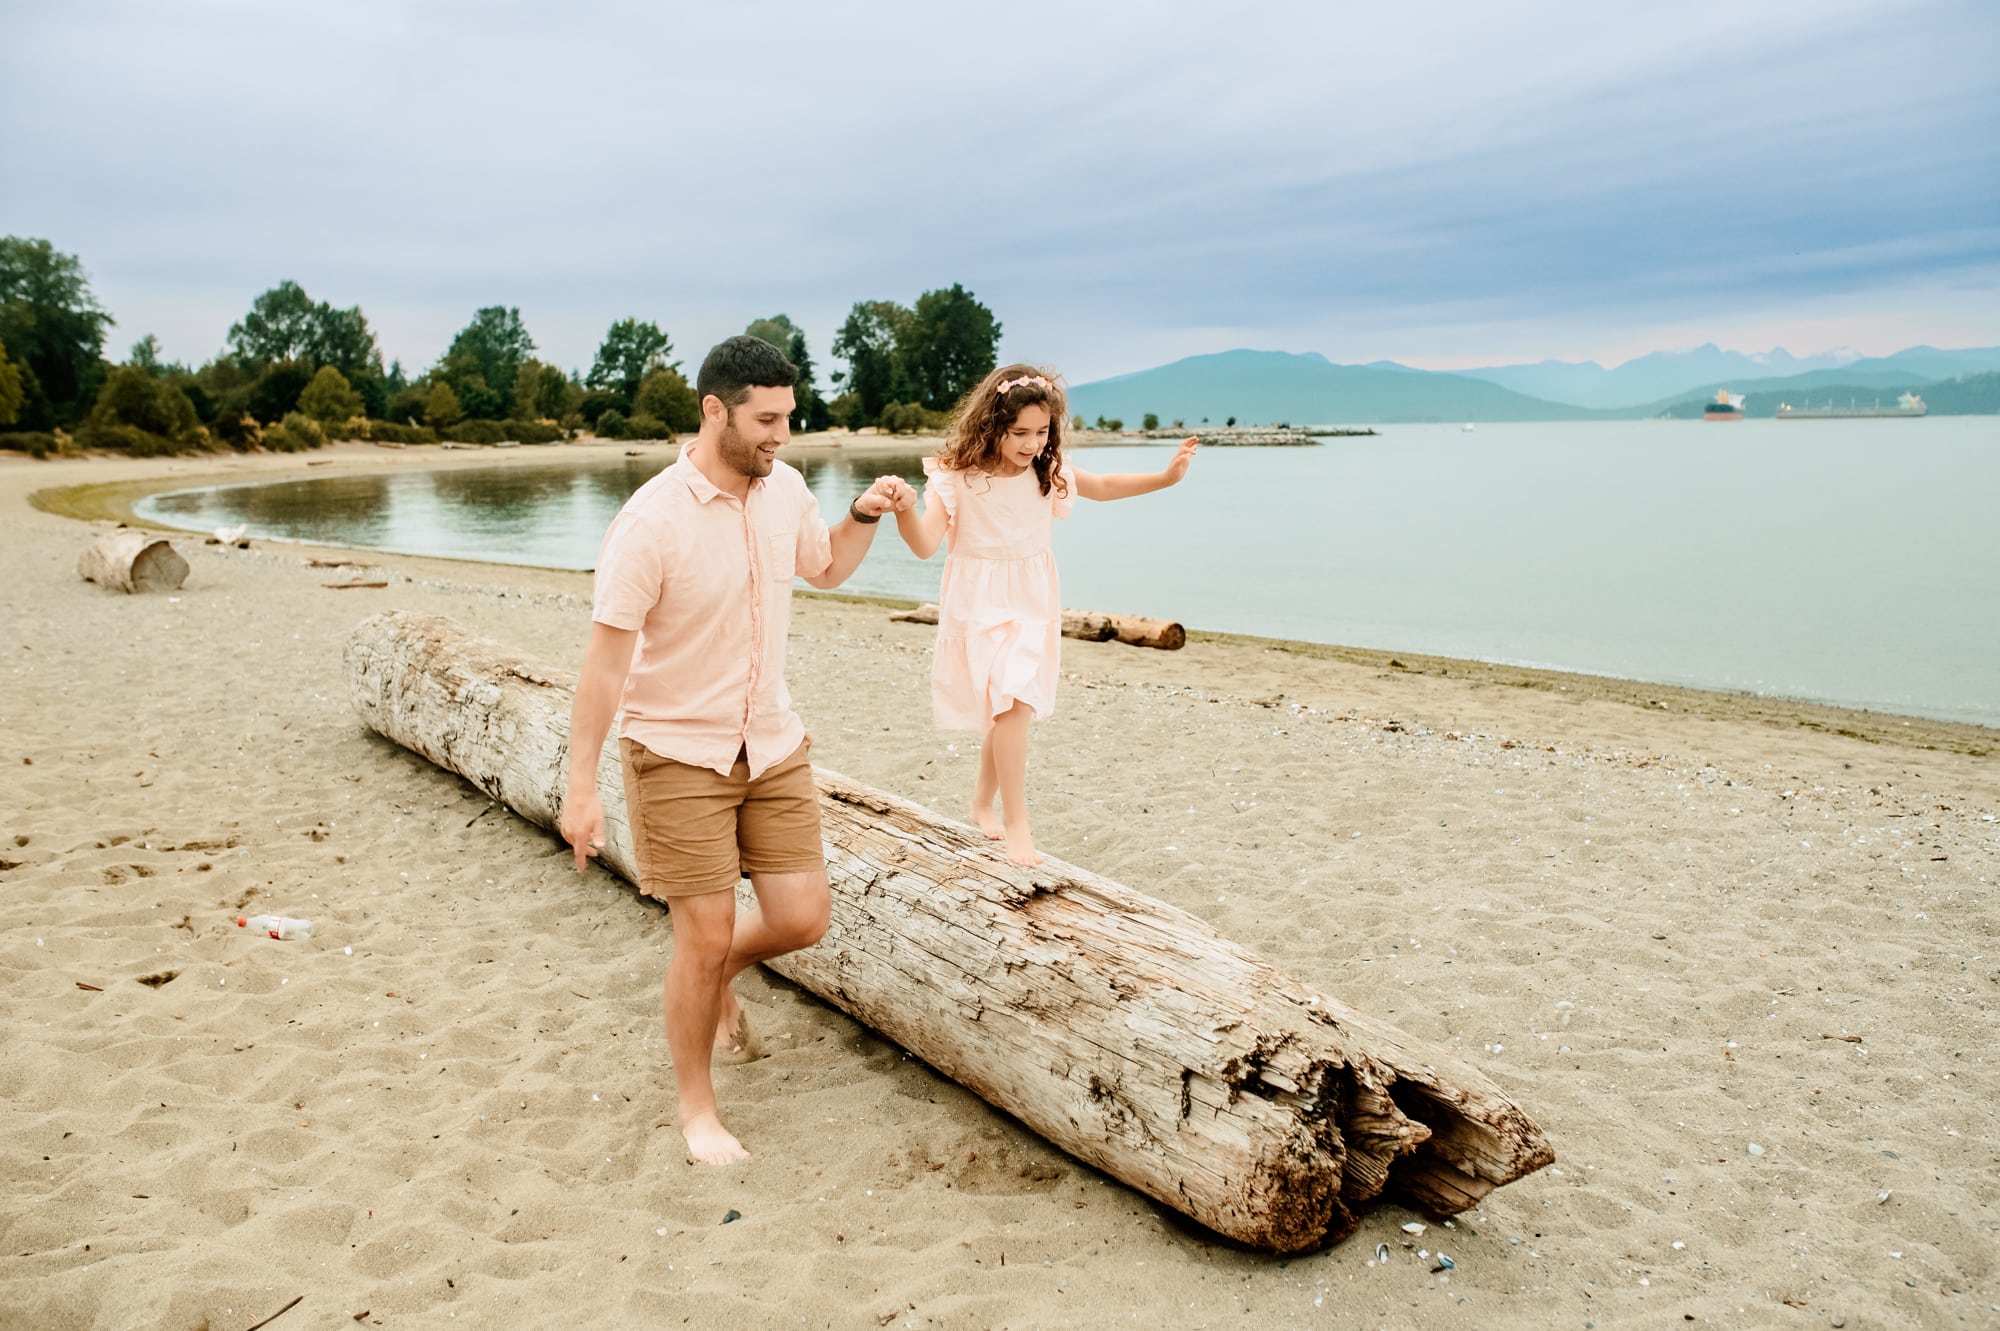 Dad leads his daughter to walk across a log at Jericho beach family photo session.